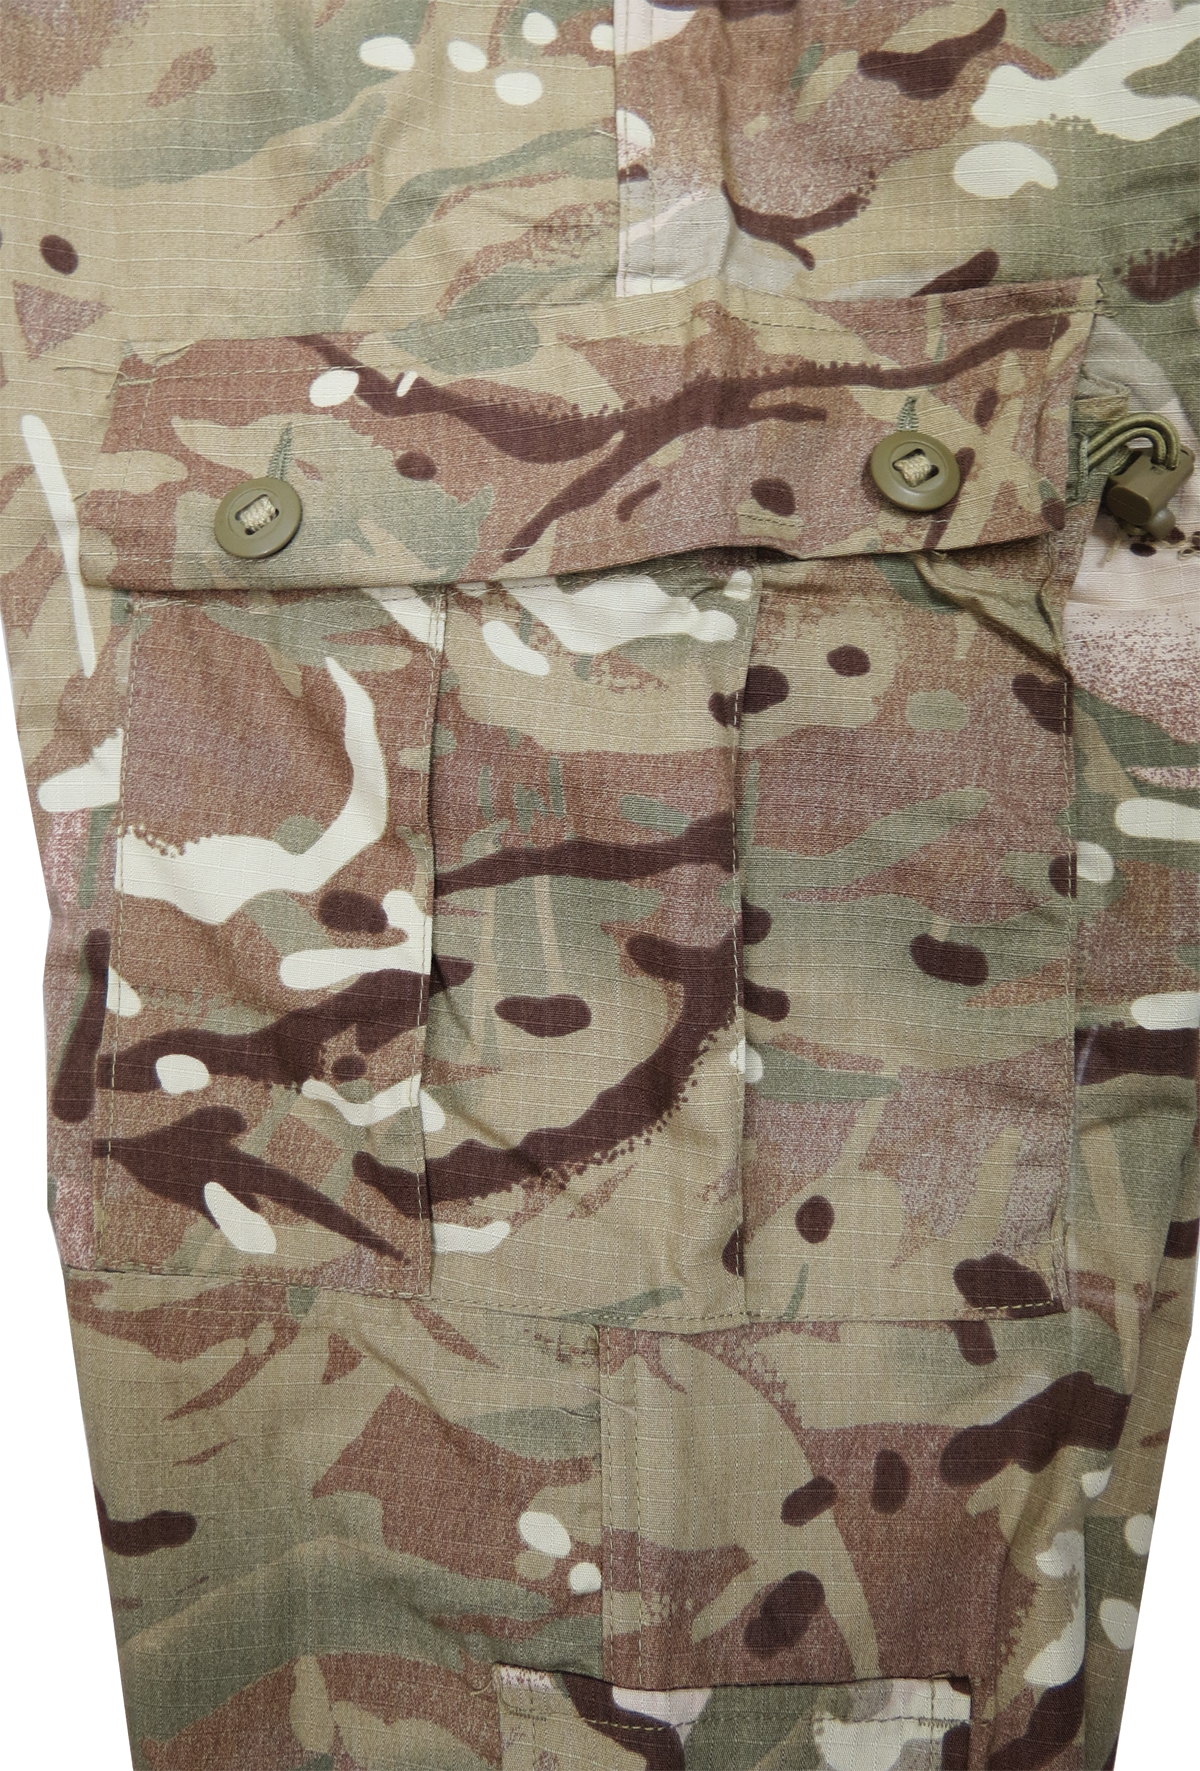 Highlander Elite RIPSTOP Trousers Military Army Camouflage Security DPM Camo